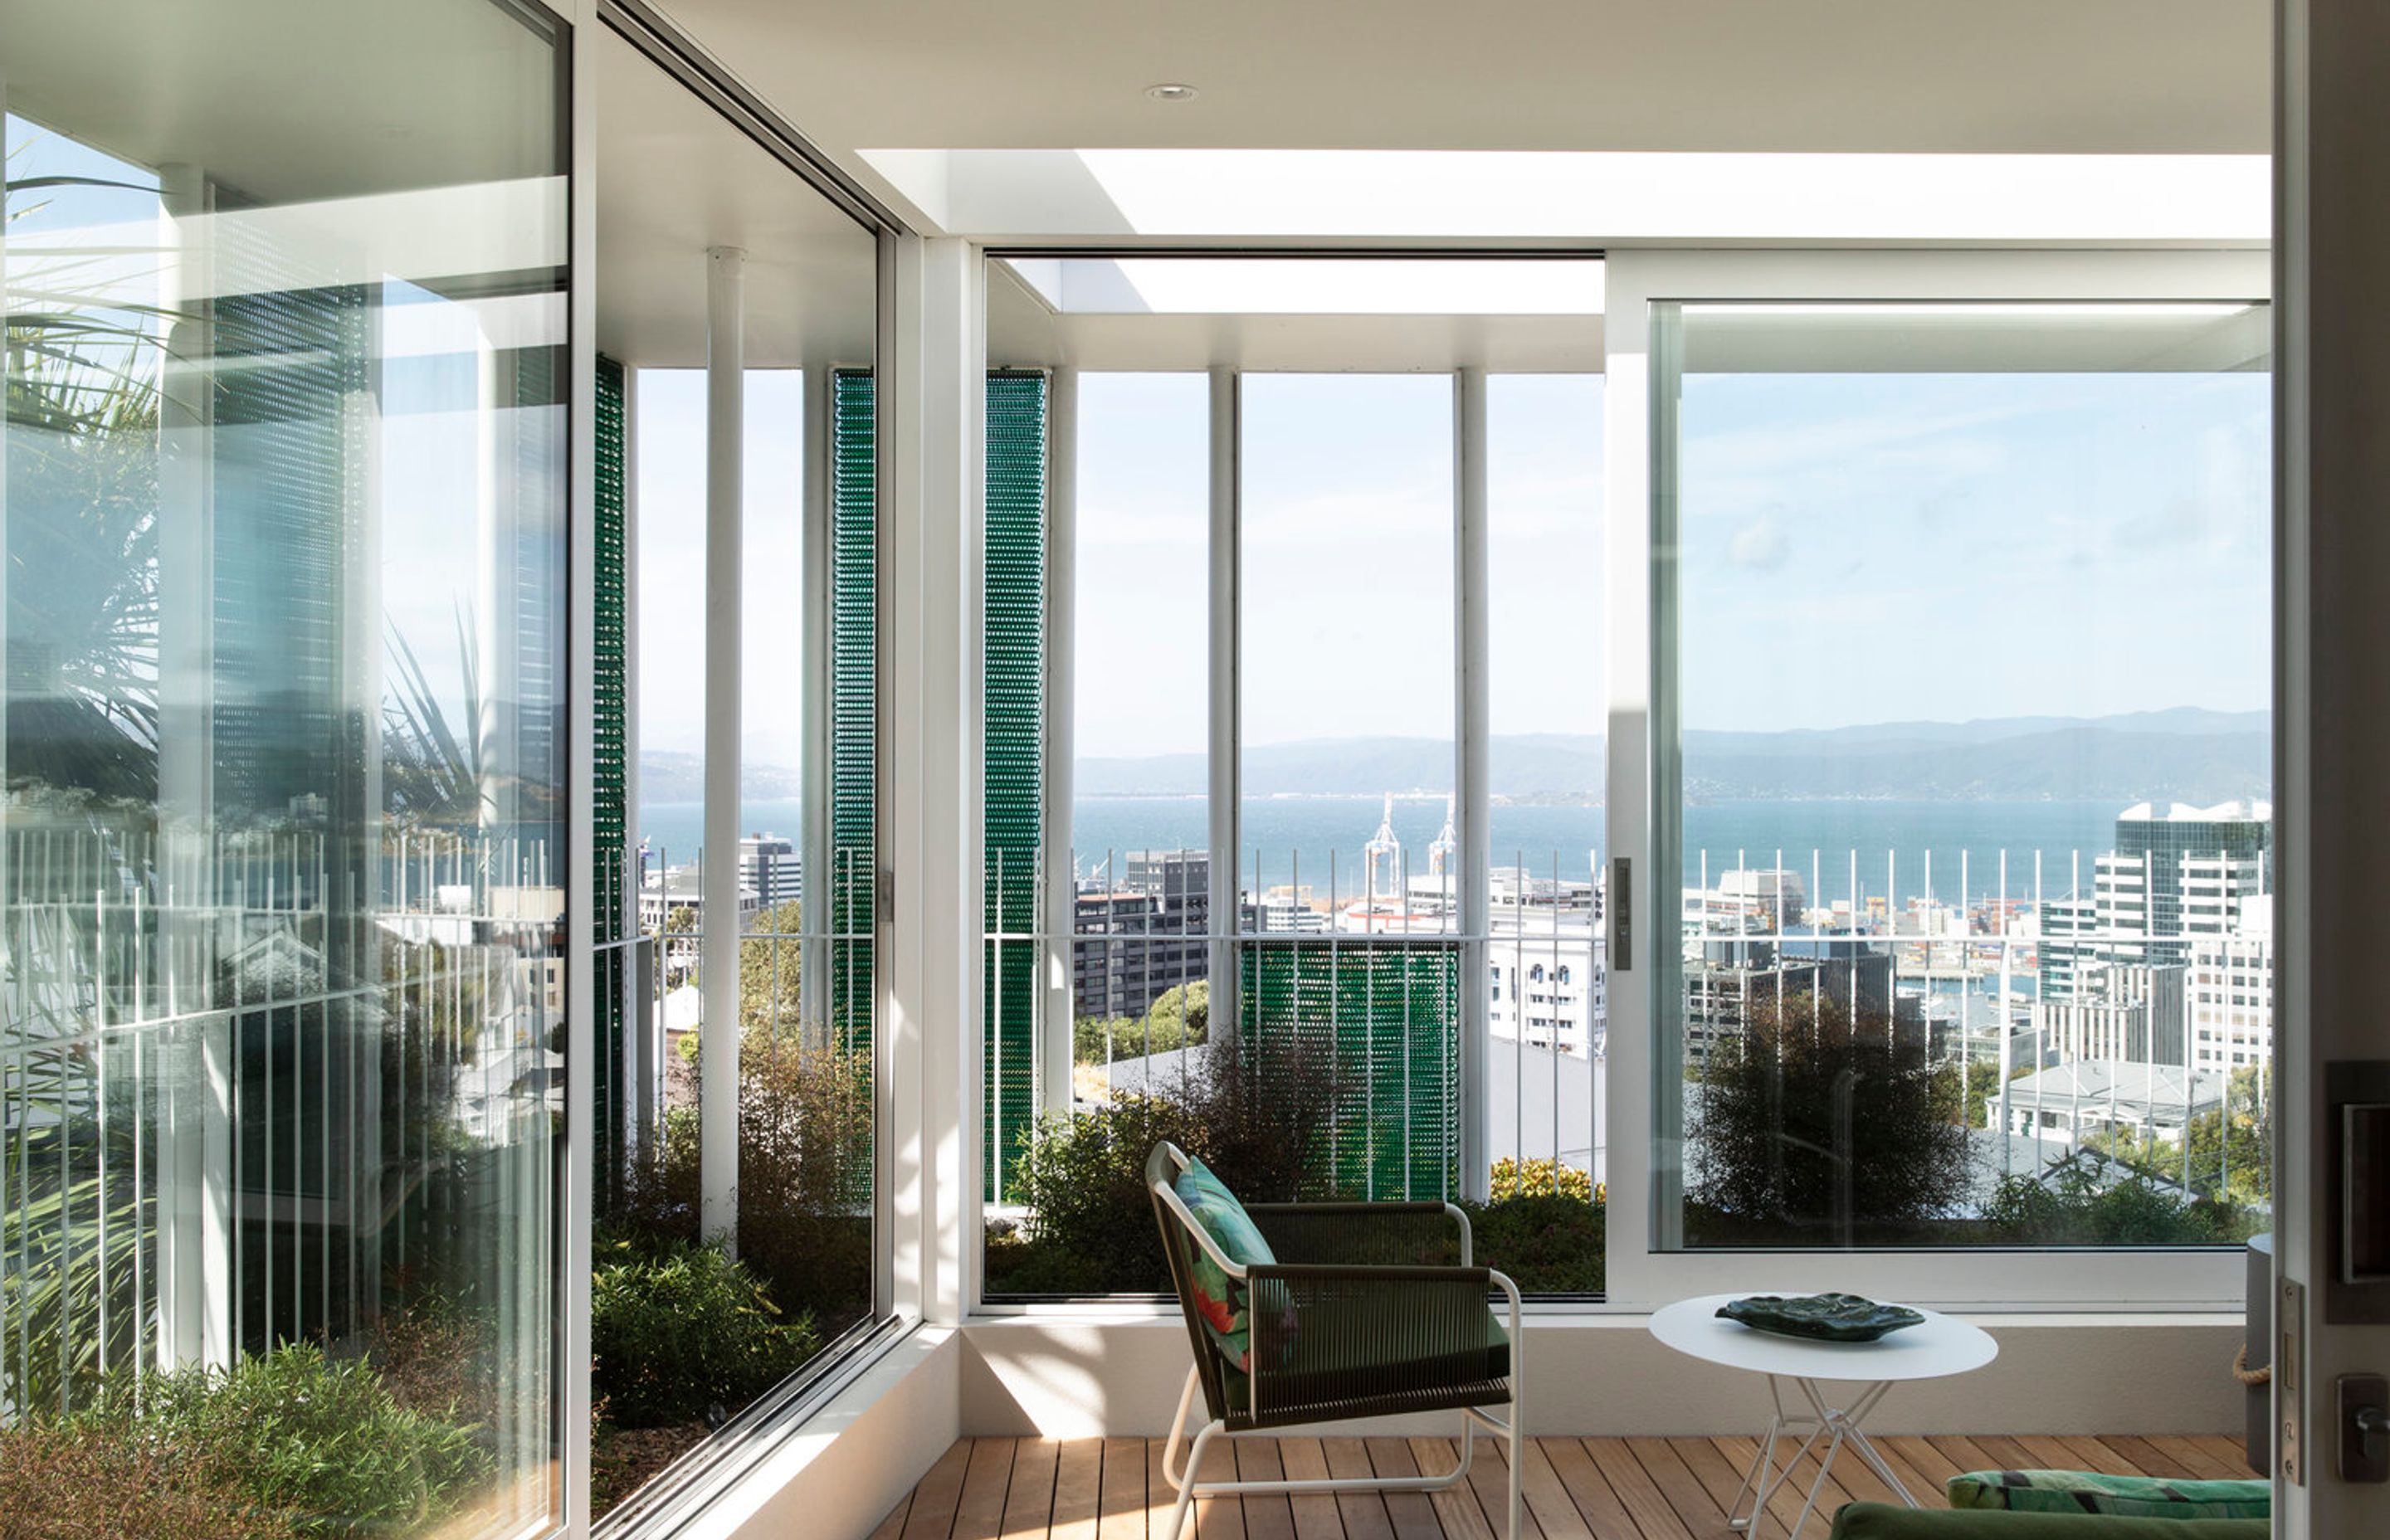 The winter garden in the upstairs apartment features sliding doors that open the interior up to the spectacular view of Wellington harbour and city.